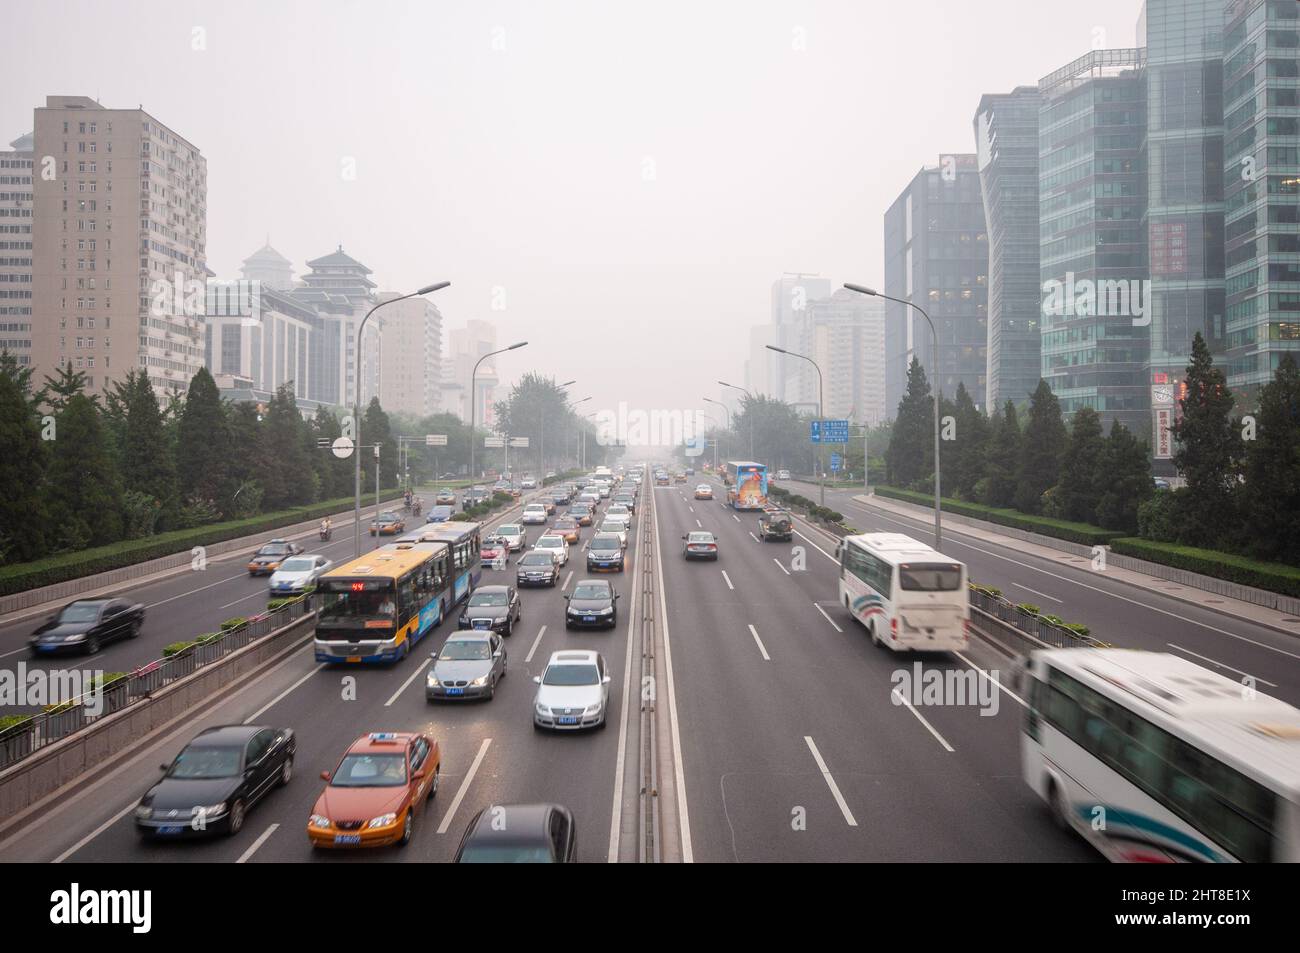 Beijing, China - August 13, 2010: Air pollution shrouds moden office buildings that line Beijing's Second Ring Road. Stock Photo